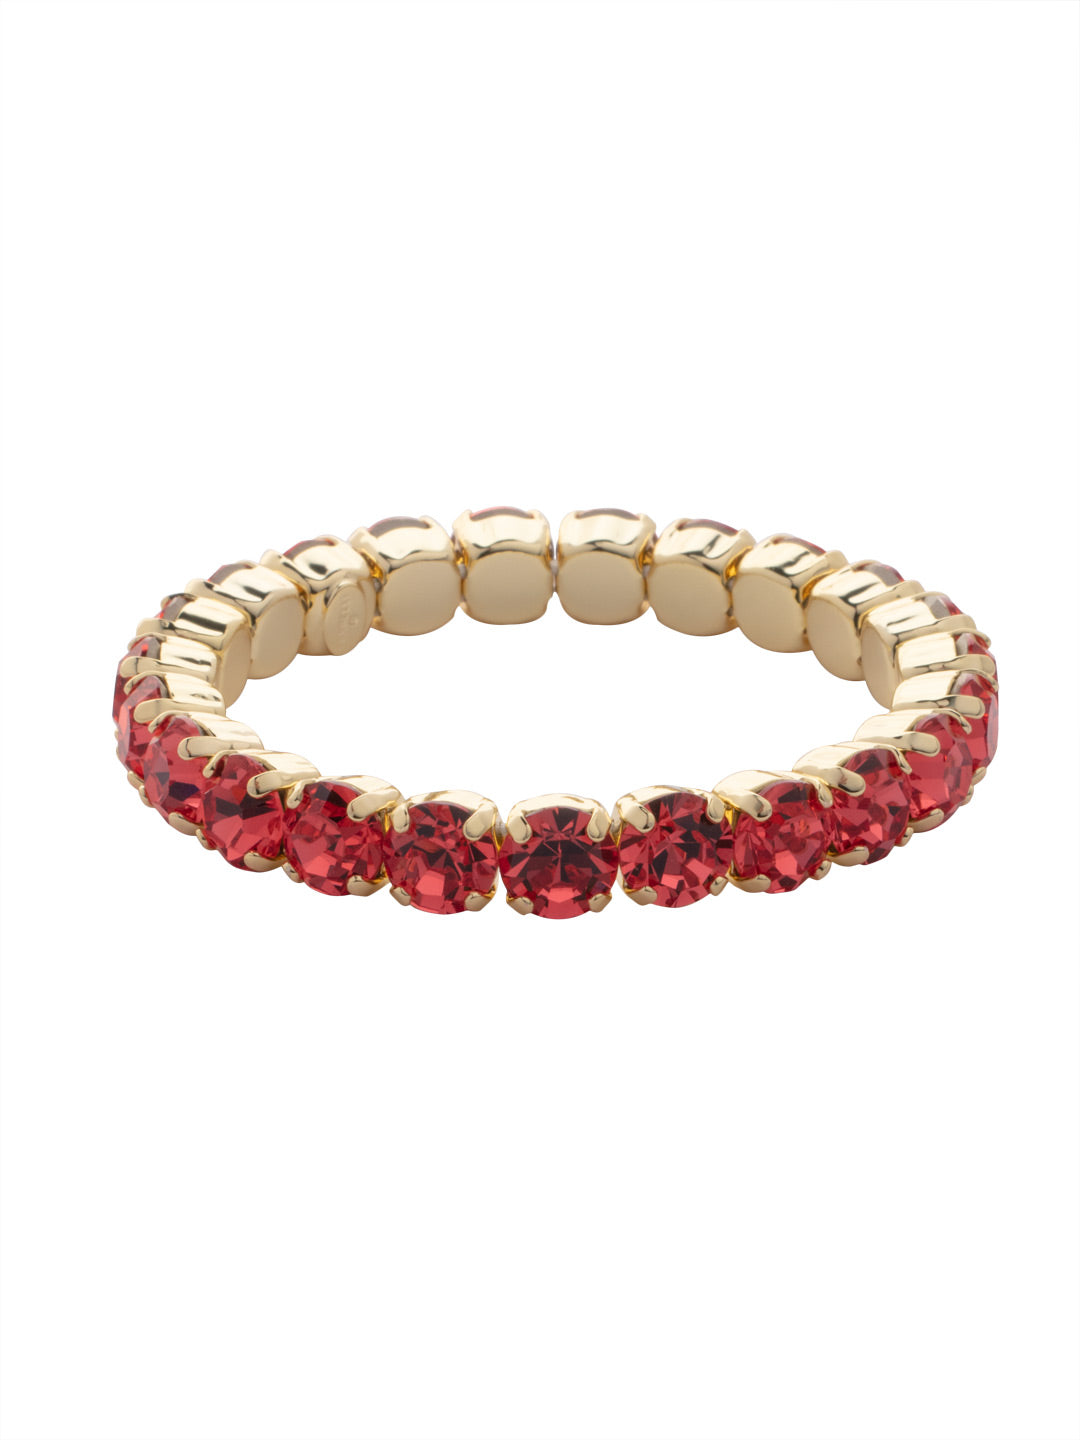 7 inch Sienna Stretch Bracelet - BFD50BGPAD - <p>A modern take on a classic style, the Sienna Stretch Bracelet features a line of crystals on a sturdy jewelers' filament, stretching to fit most wrists comfortably, without the hassle of a clasp! (7 inches in diameter, fits average wrist sizes) From Sorrelli's Padparadscha collection in our Bright Gold-tone finish.</p>